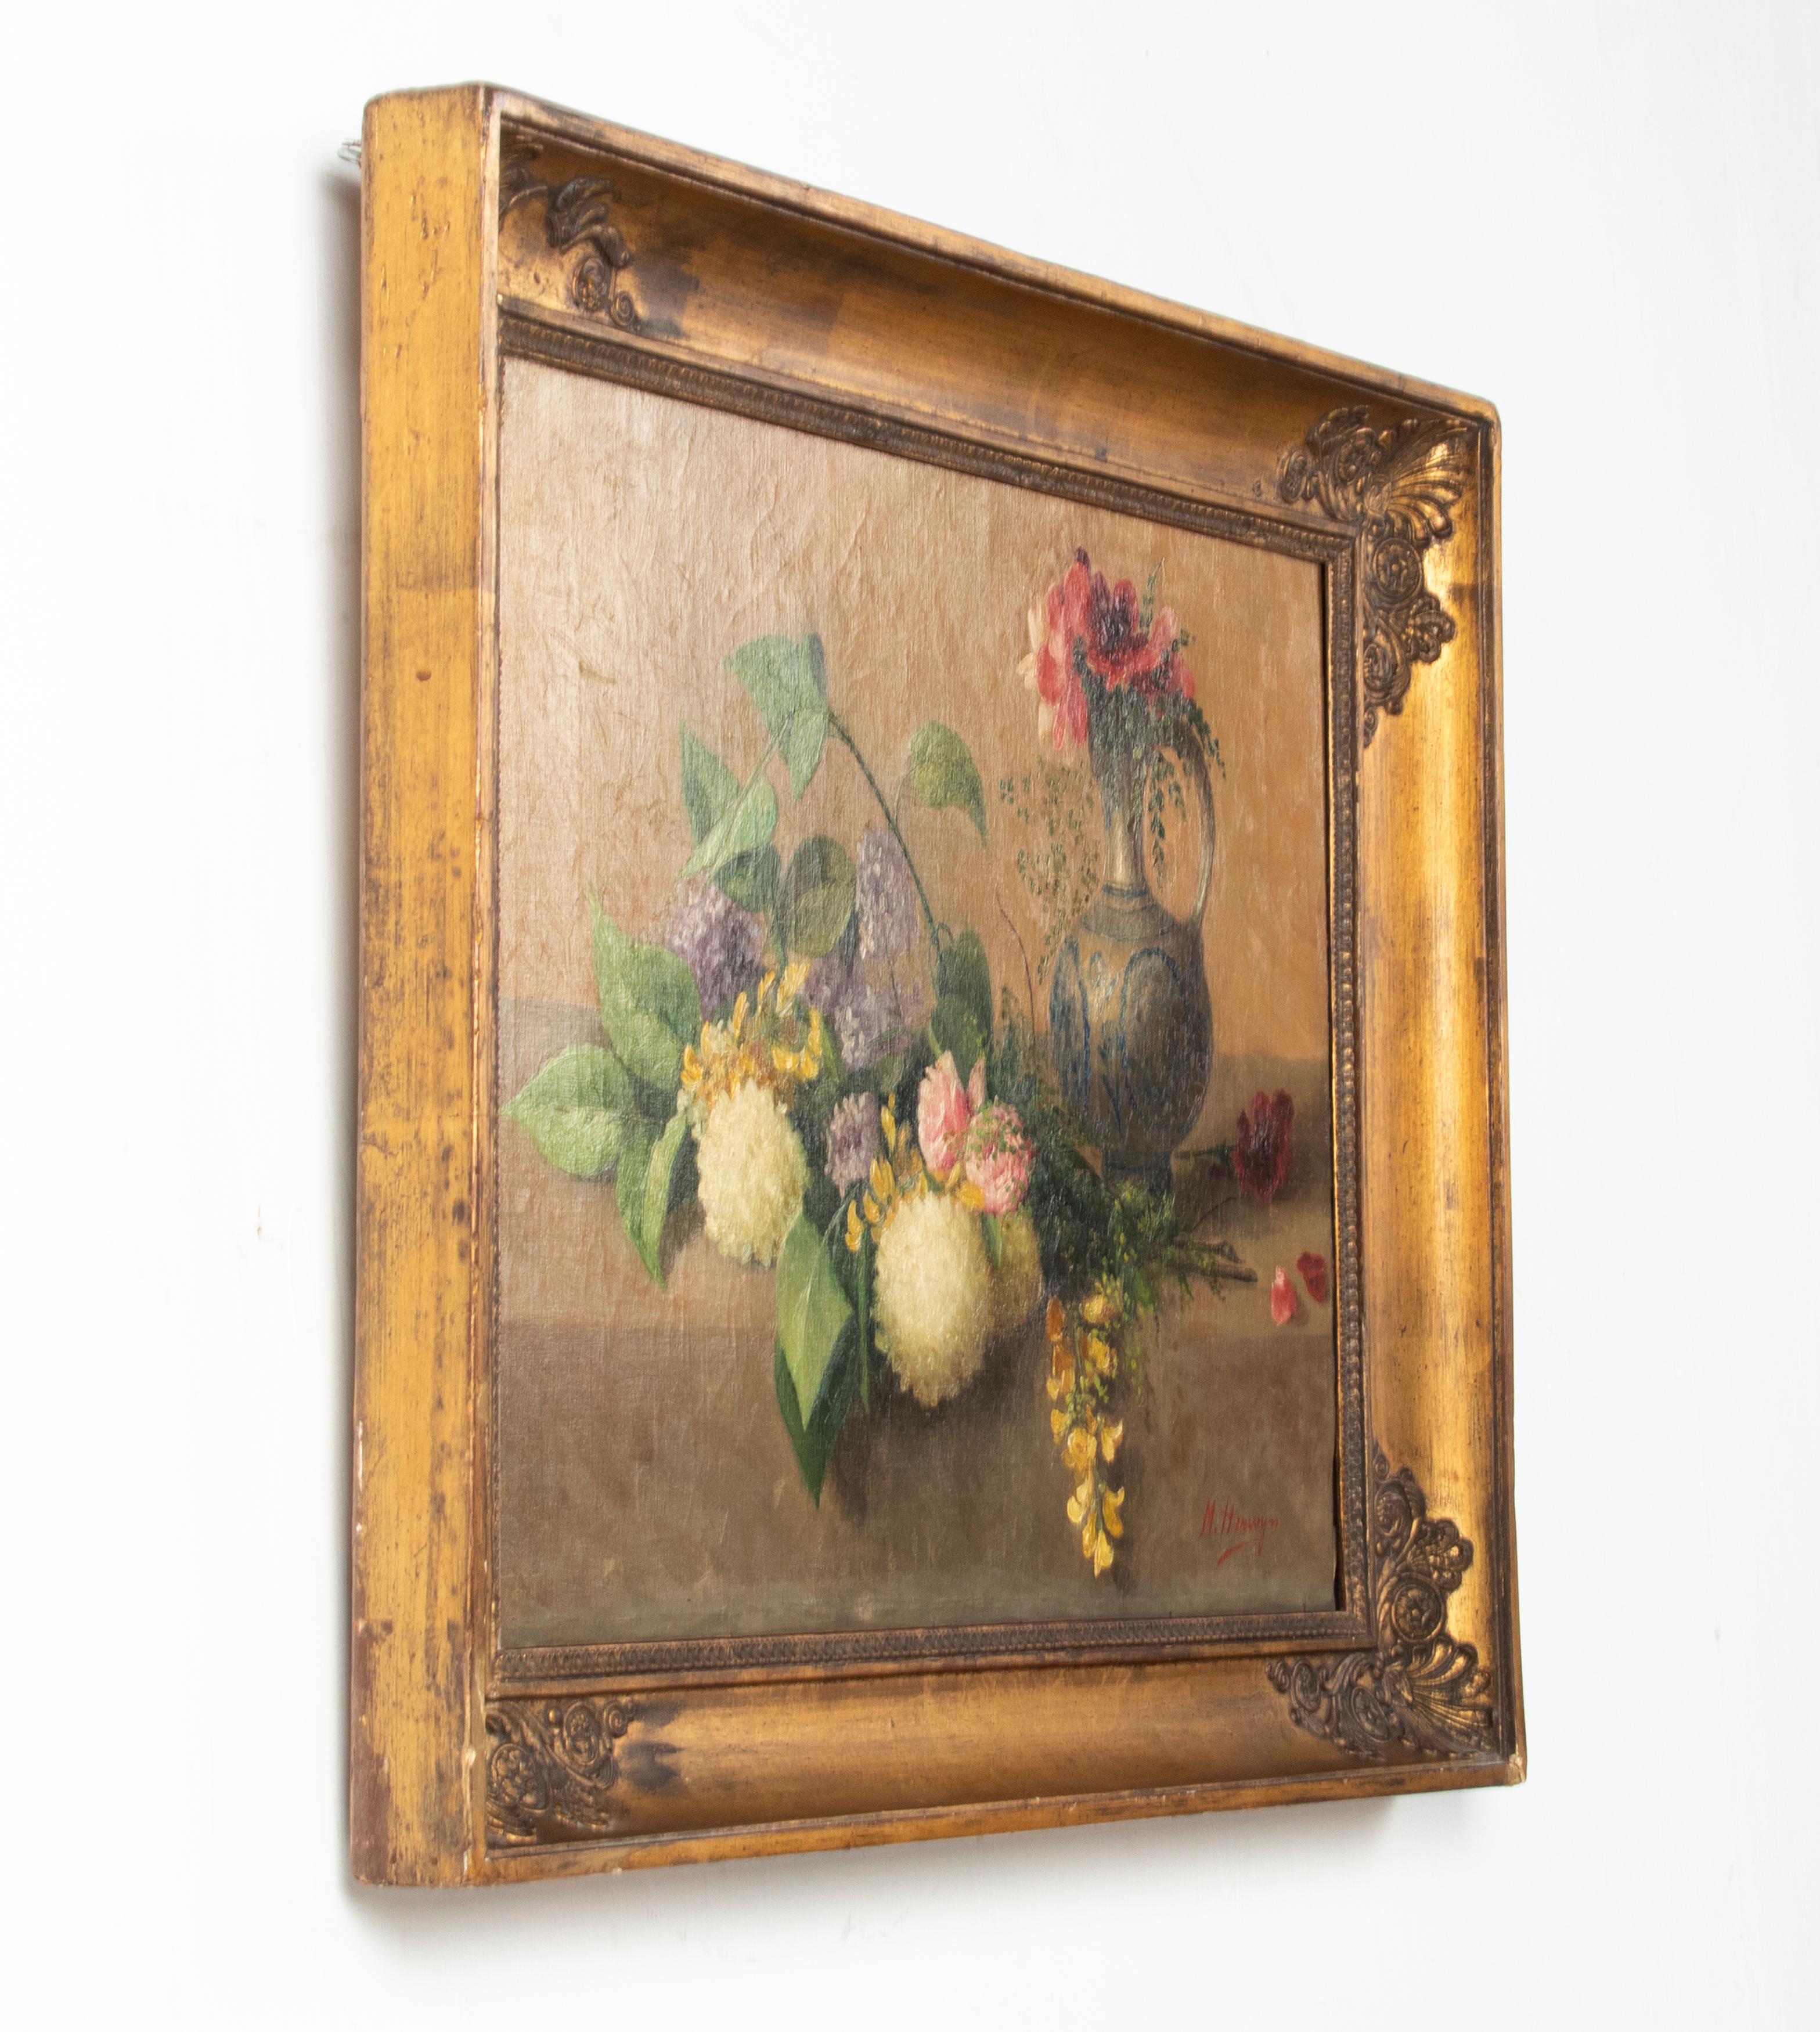 19th Century Flower Still Life Painting Oil on Canvas by M. Herwyn 5